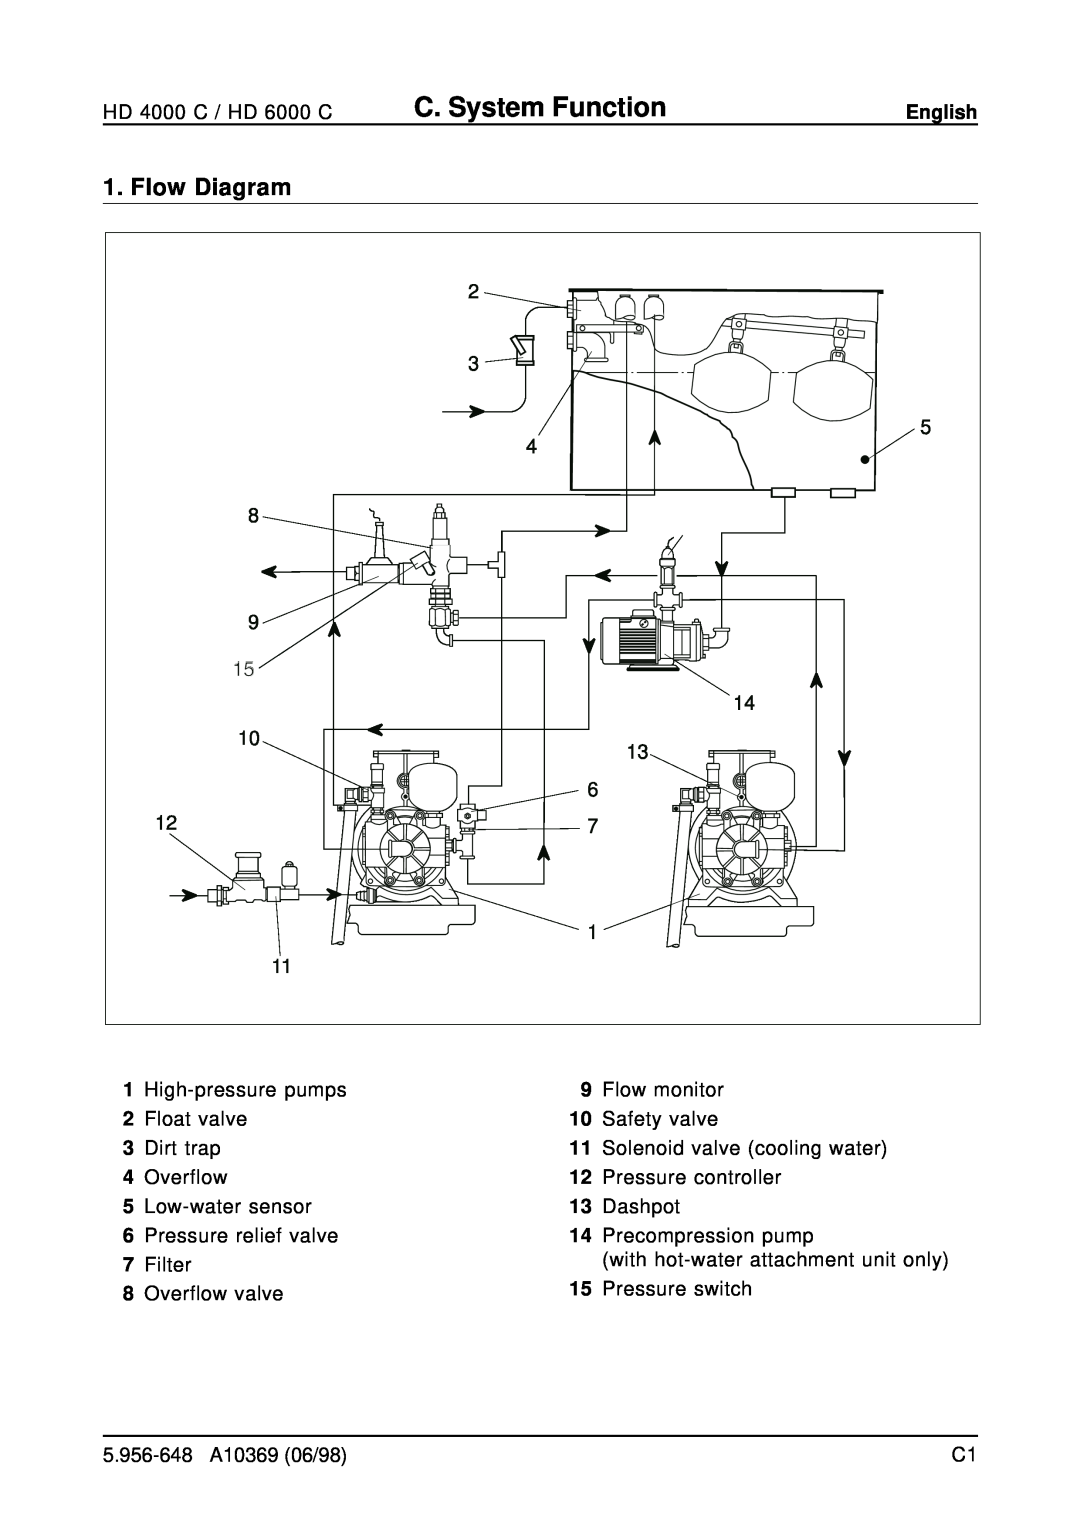 Karcher HD 6000 C, HD 4000 C operating instructions C. System Function, Flow Diagram, English 